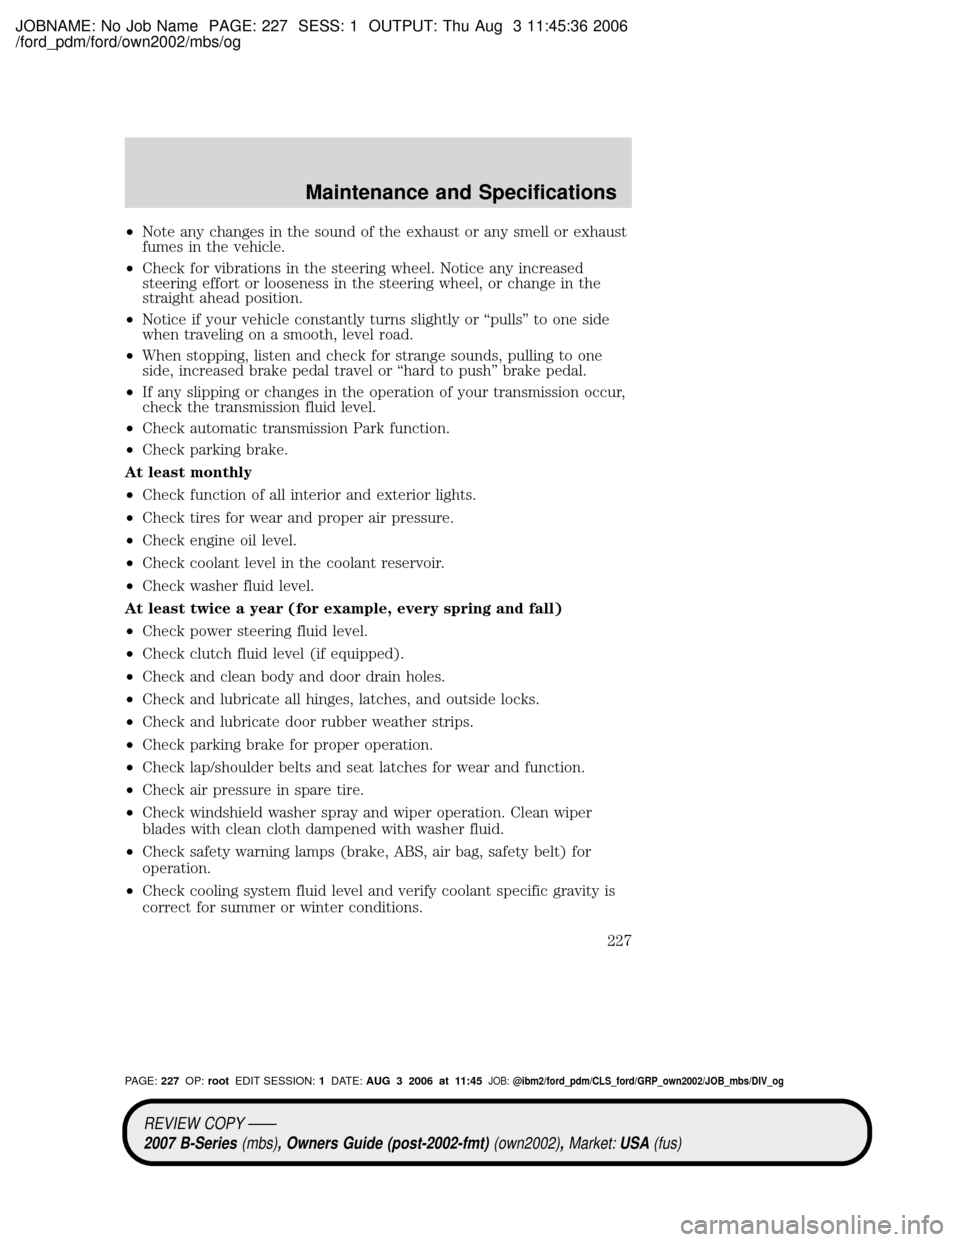 MAZDA MODEL B2300 TRUCK 2007  Owners Manual (in English) JOBNAME: No Job Name PAGE: 227 SESS: 1 OUTPUT: Thu Aug 3 11:45:36 2006
/ford_pdm/ford/own2002/mbs/og
²Note any changes in the sound of the exhaust or any smell or exhaust
fumes in the vehicle.
²Chec